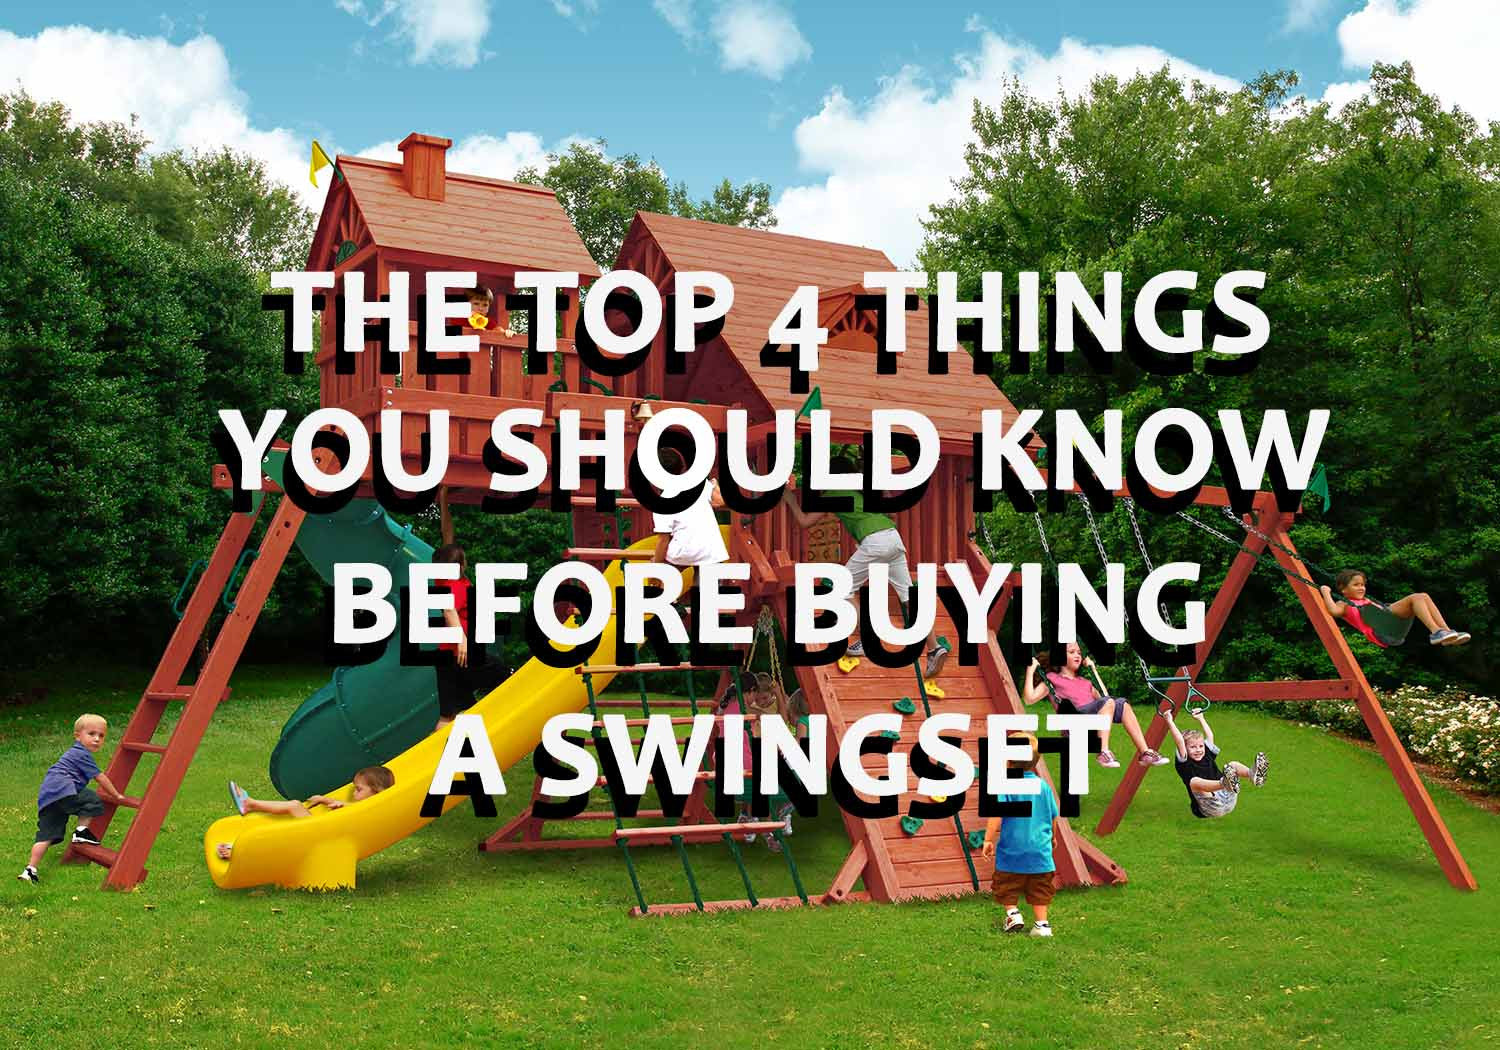 The Top 4 Things You Should Know About A Swing Set Before Buying